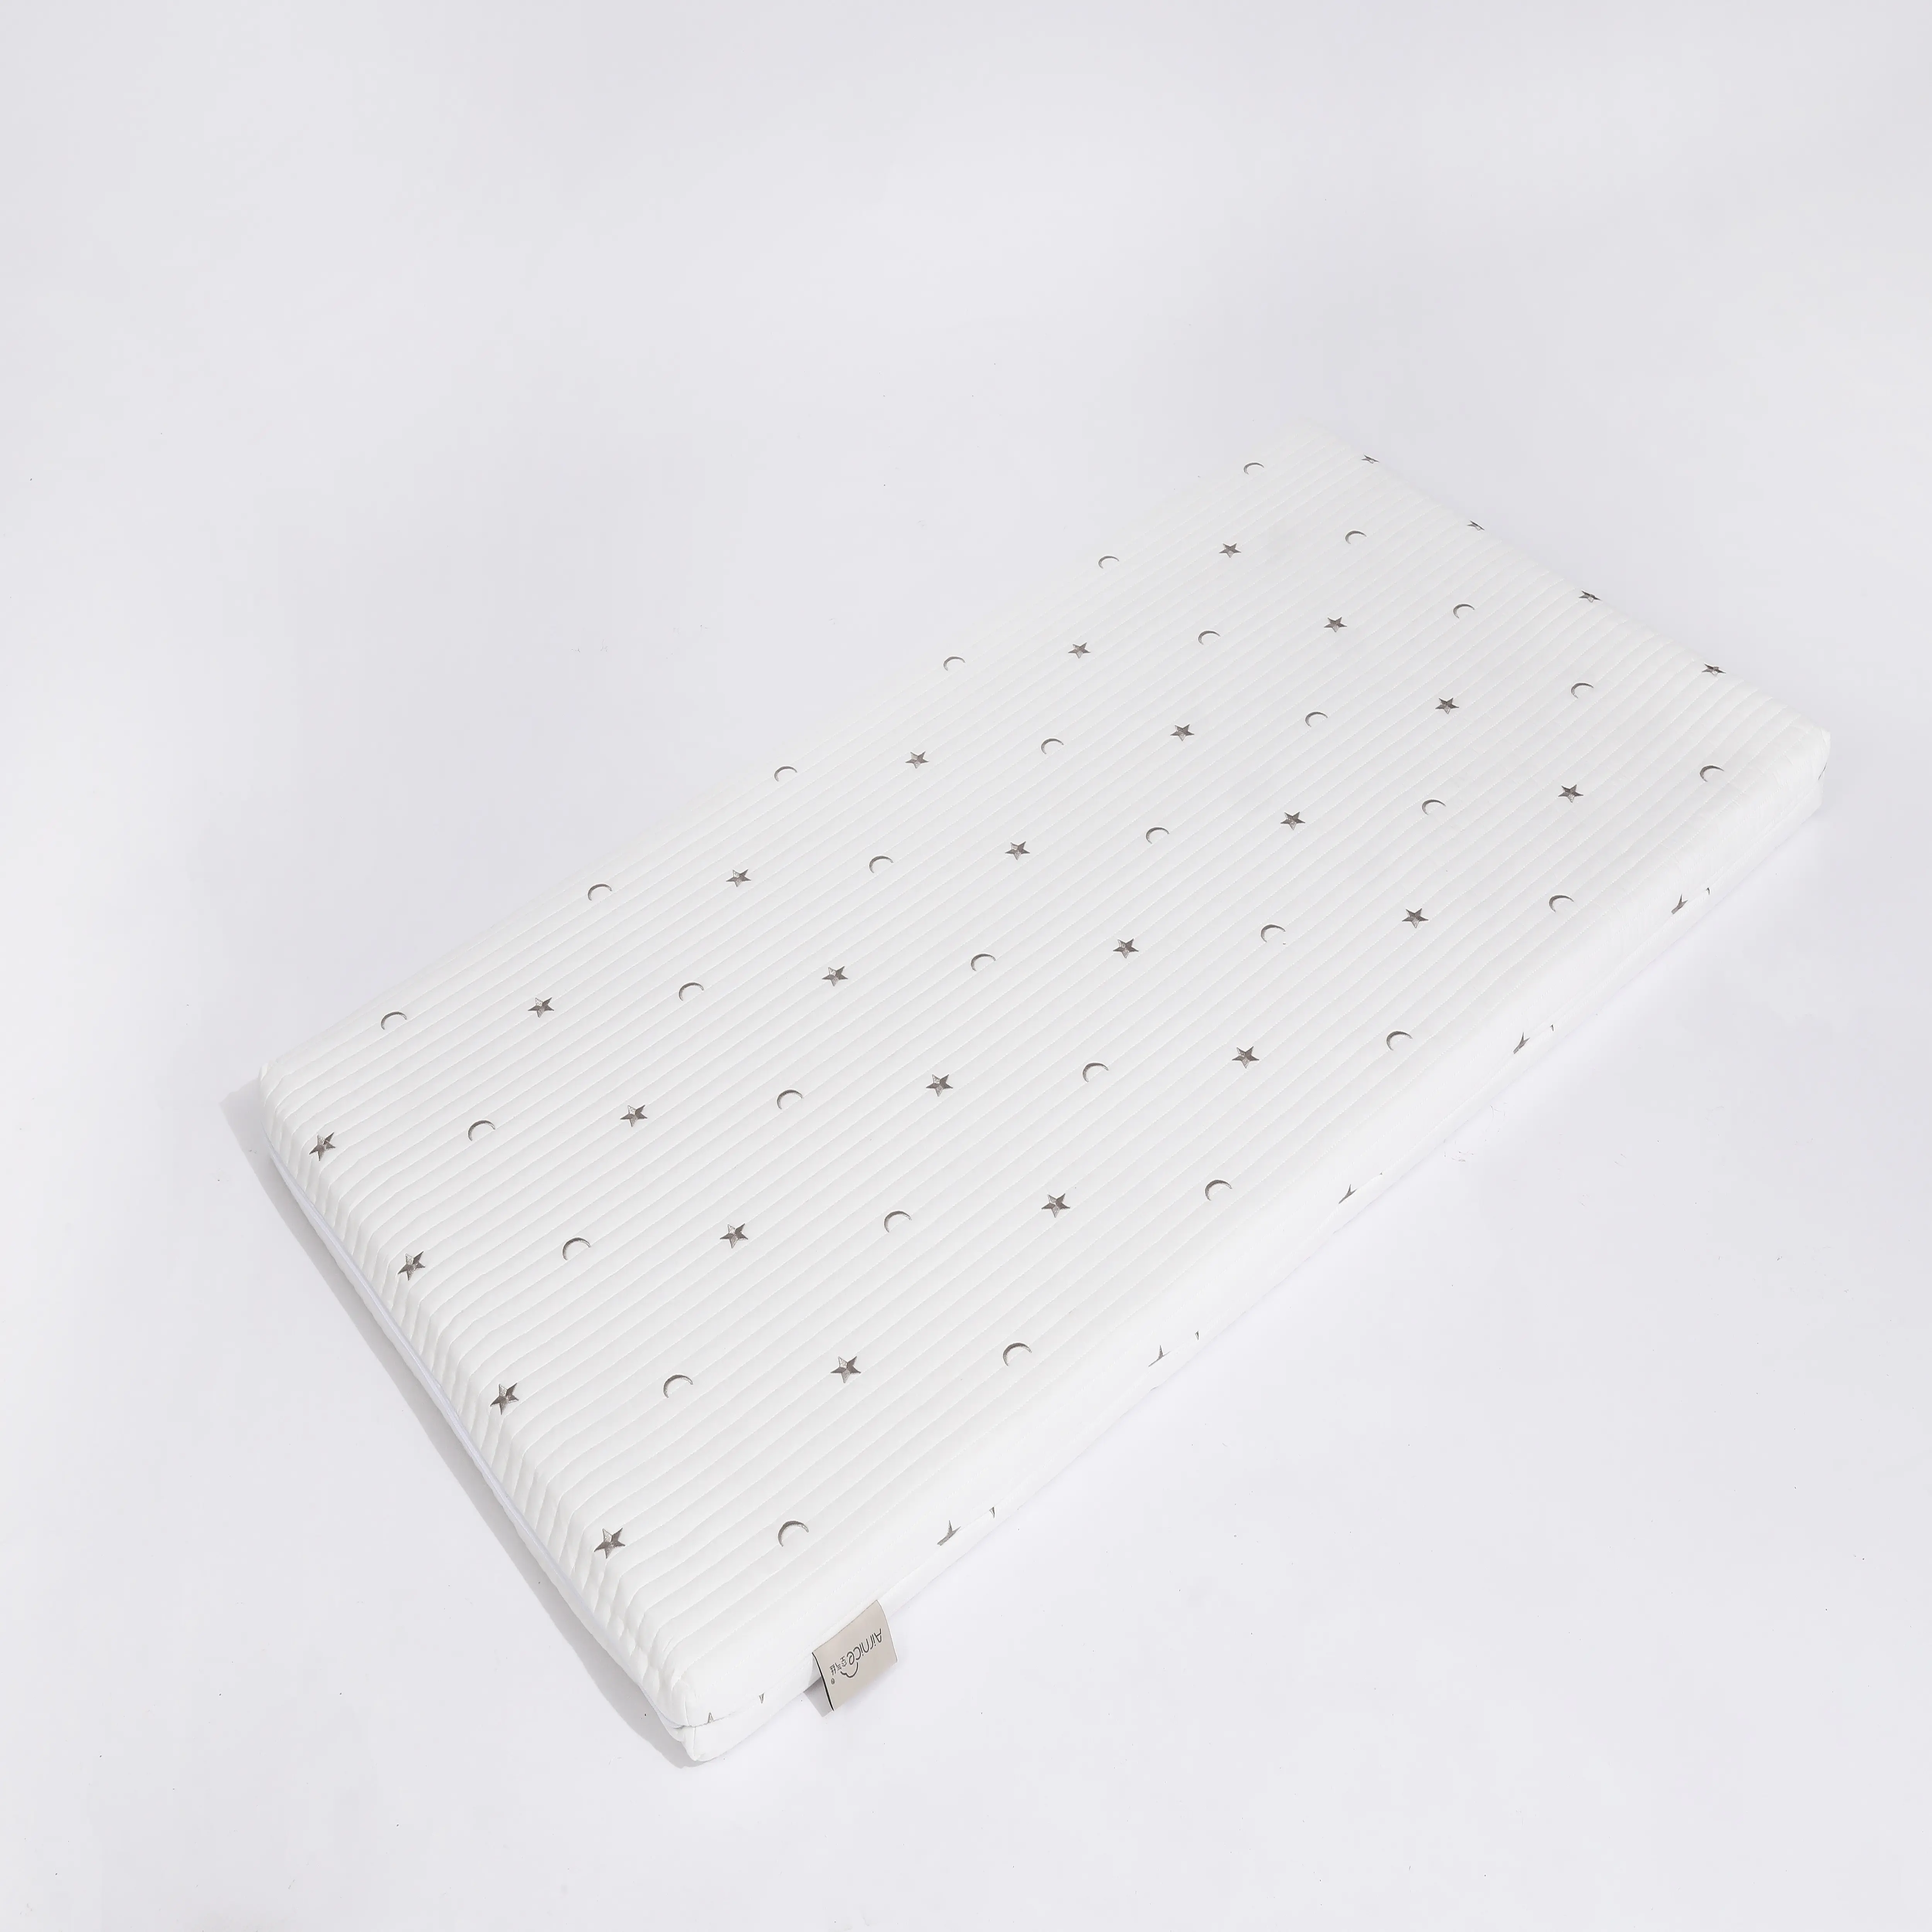 100% breathable and washable cirb mattress